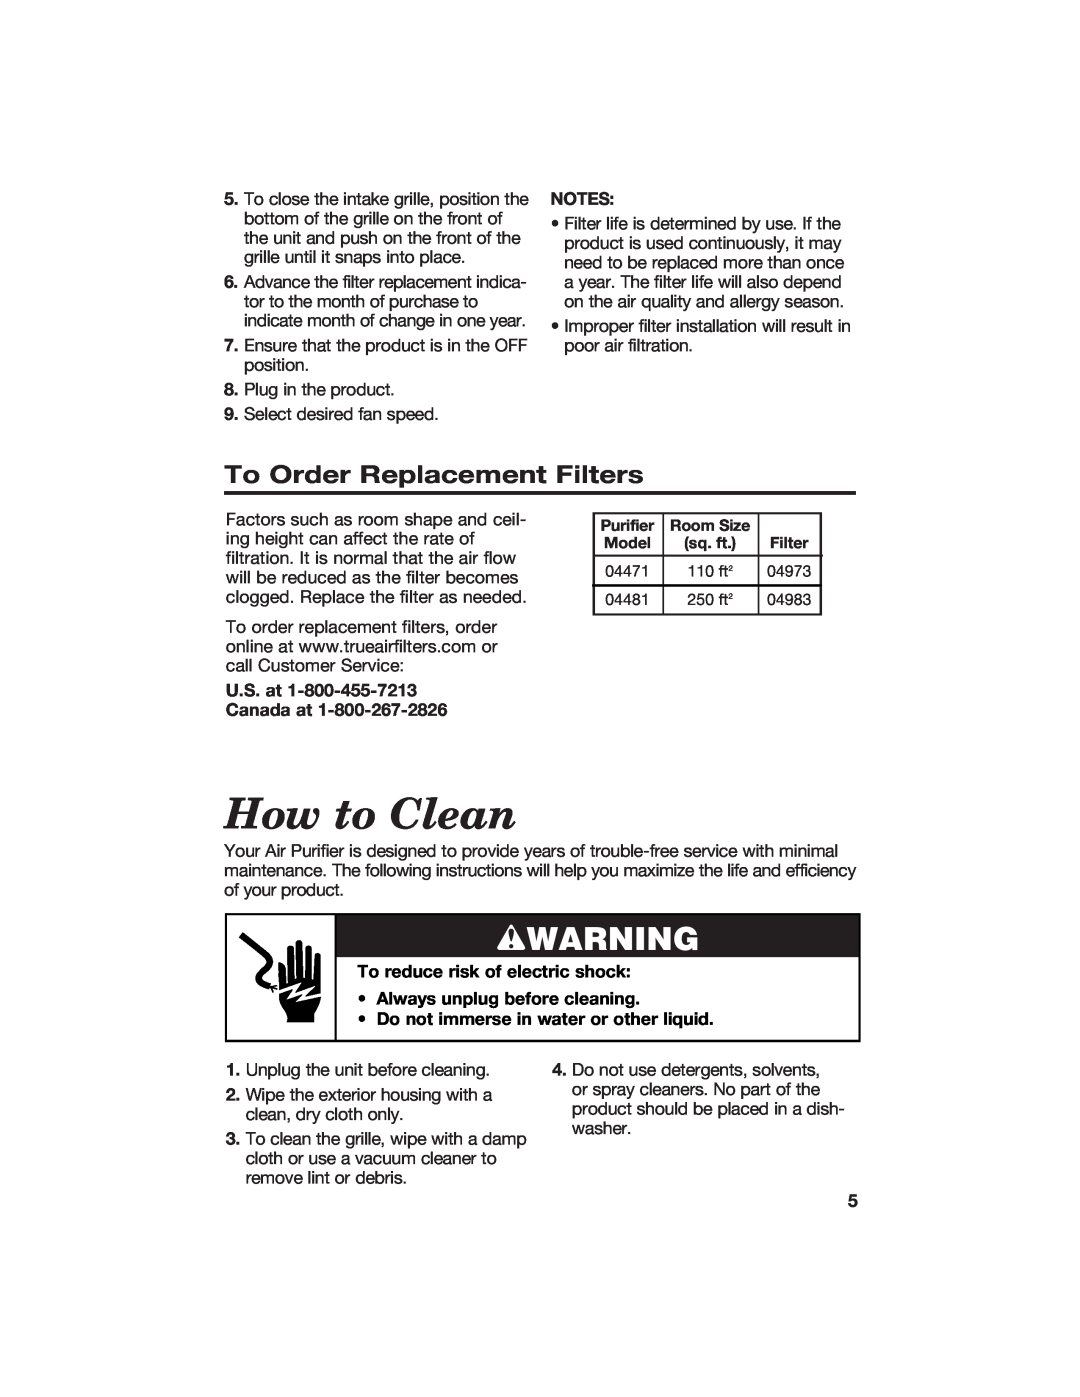 Hamilton Beach 840133100 How to Clean, To Order Replacement Filters, U.S. at Canada at, To reduce risk of electric shock 